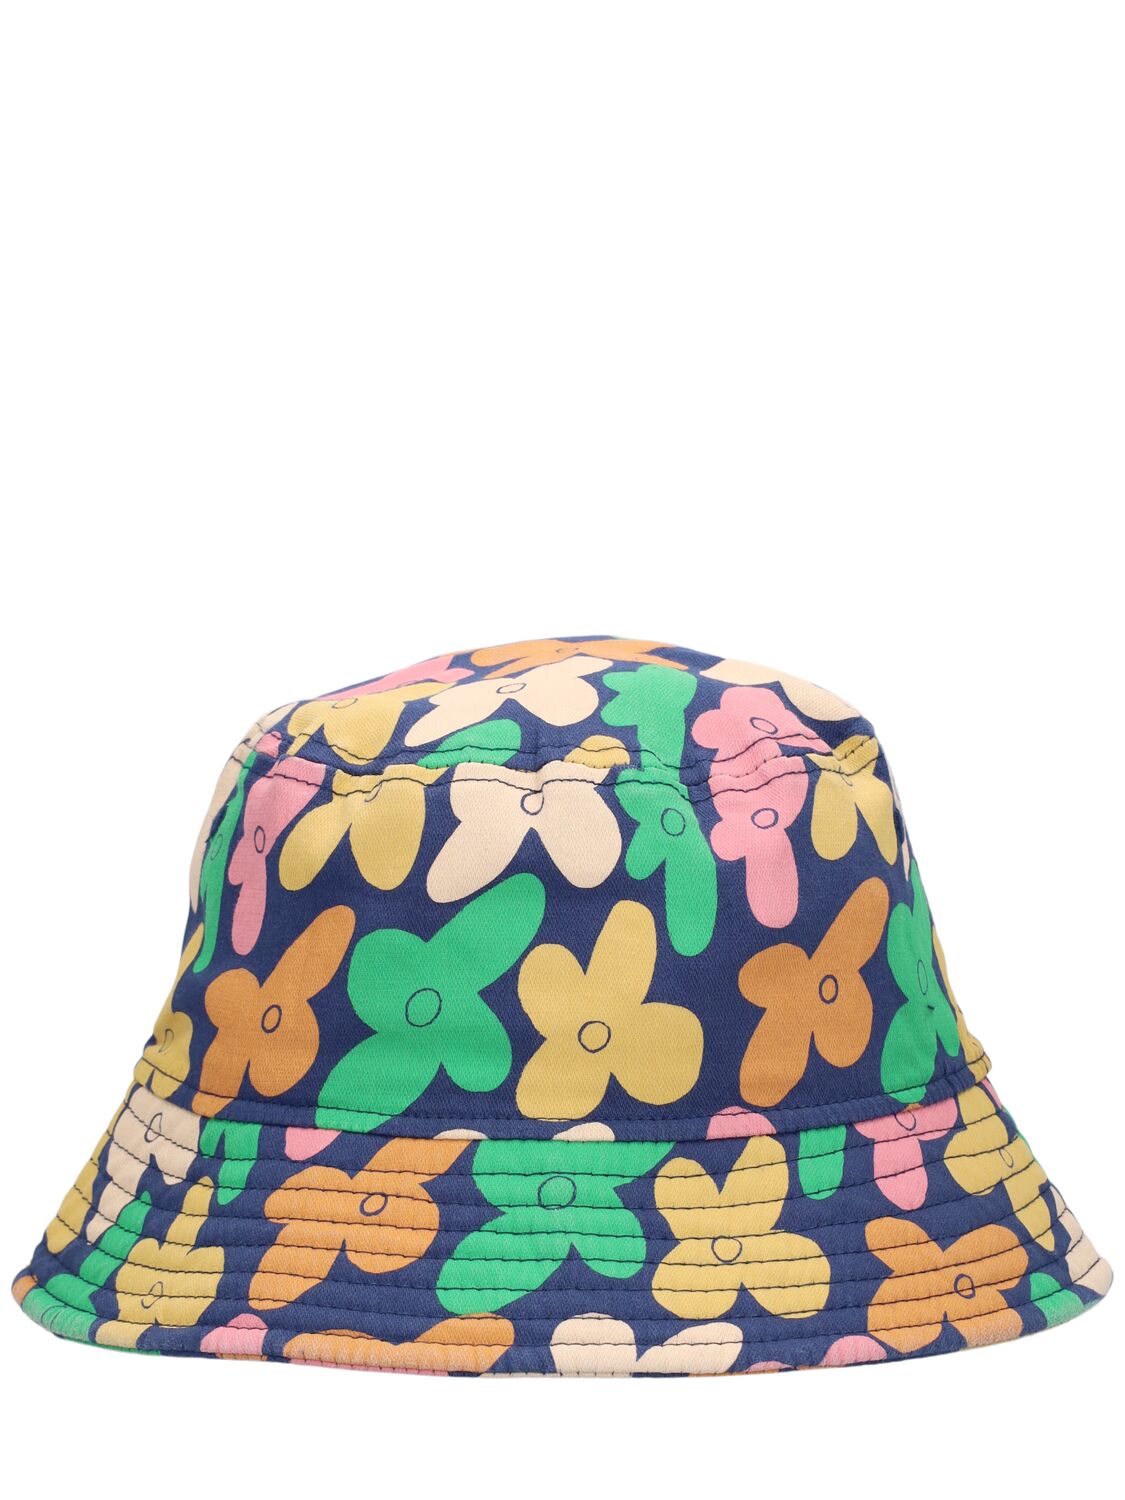 Image of Flower Printed Cotton Bucket Hat